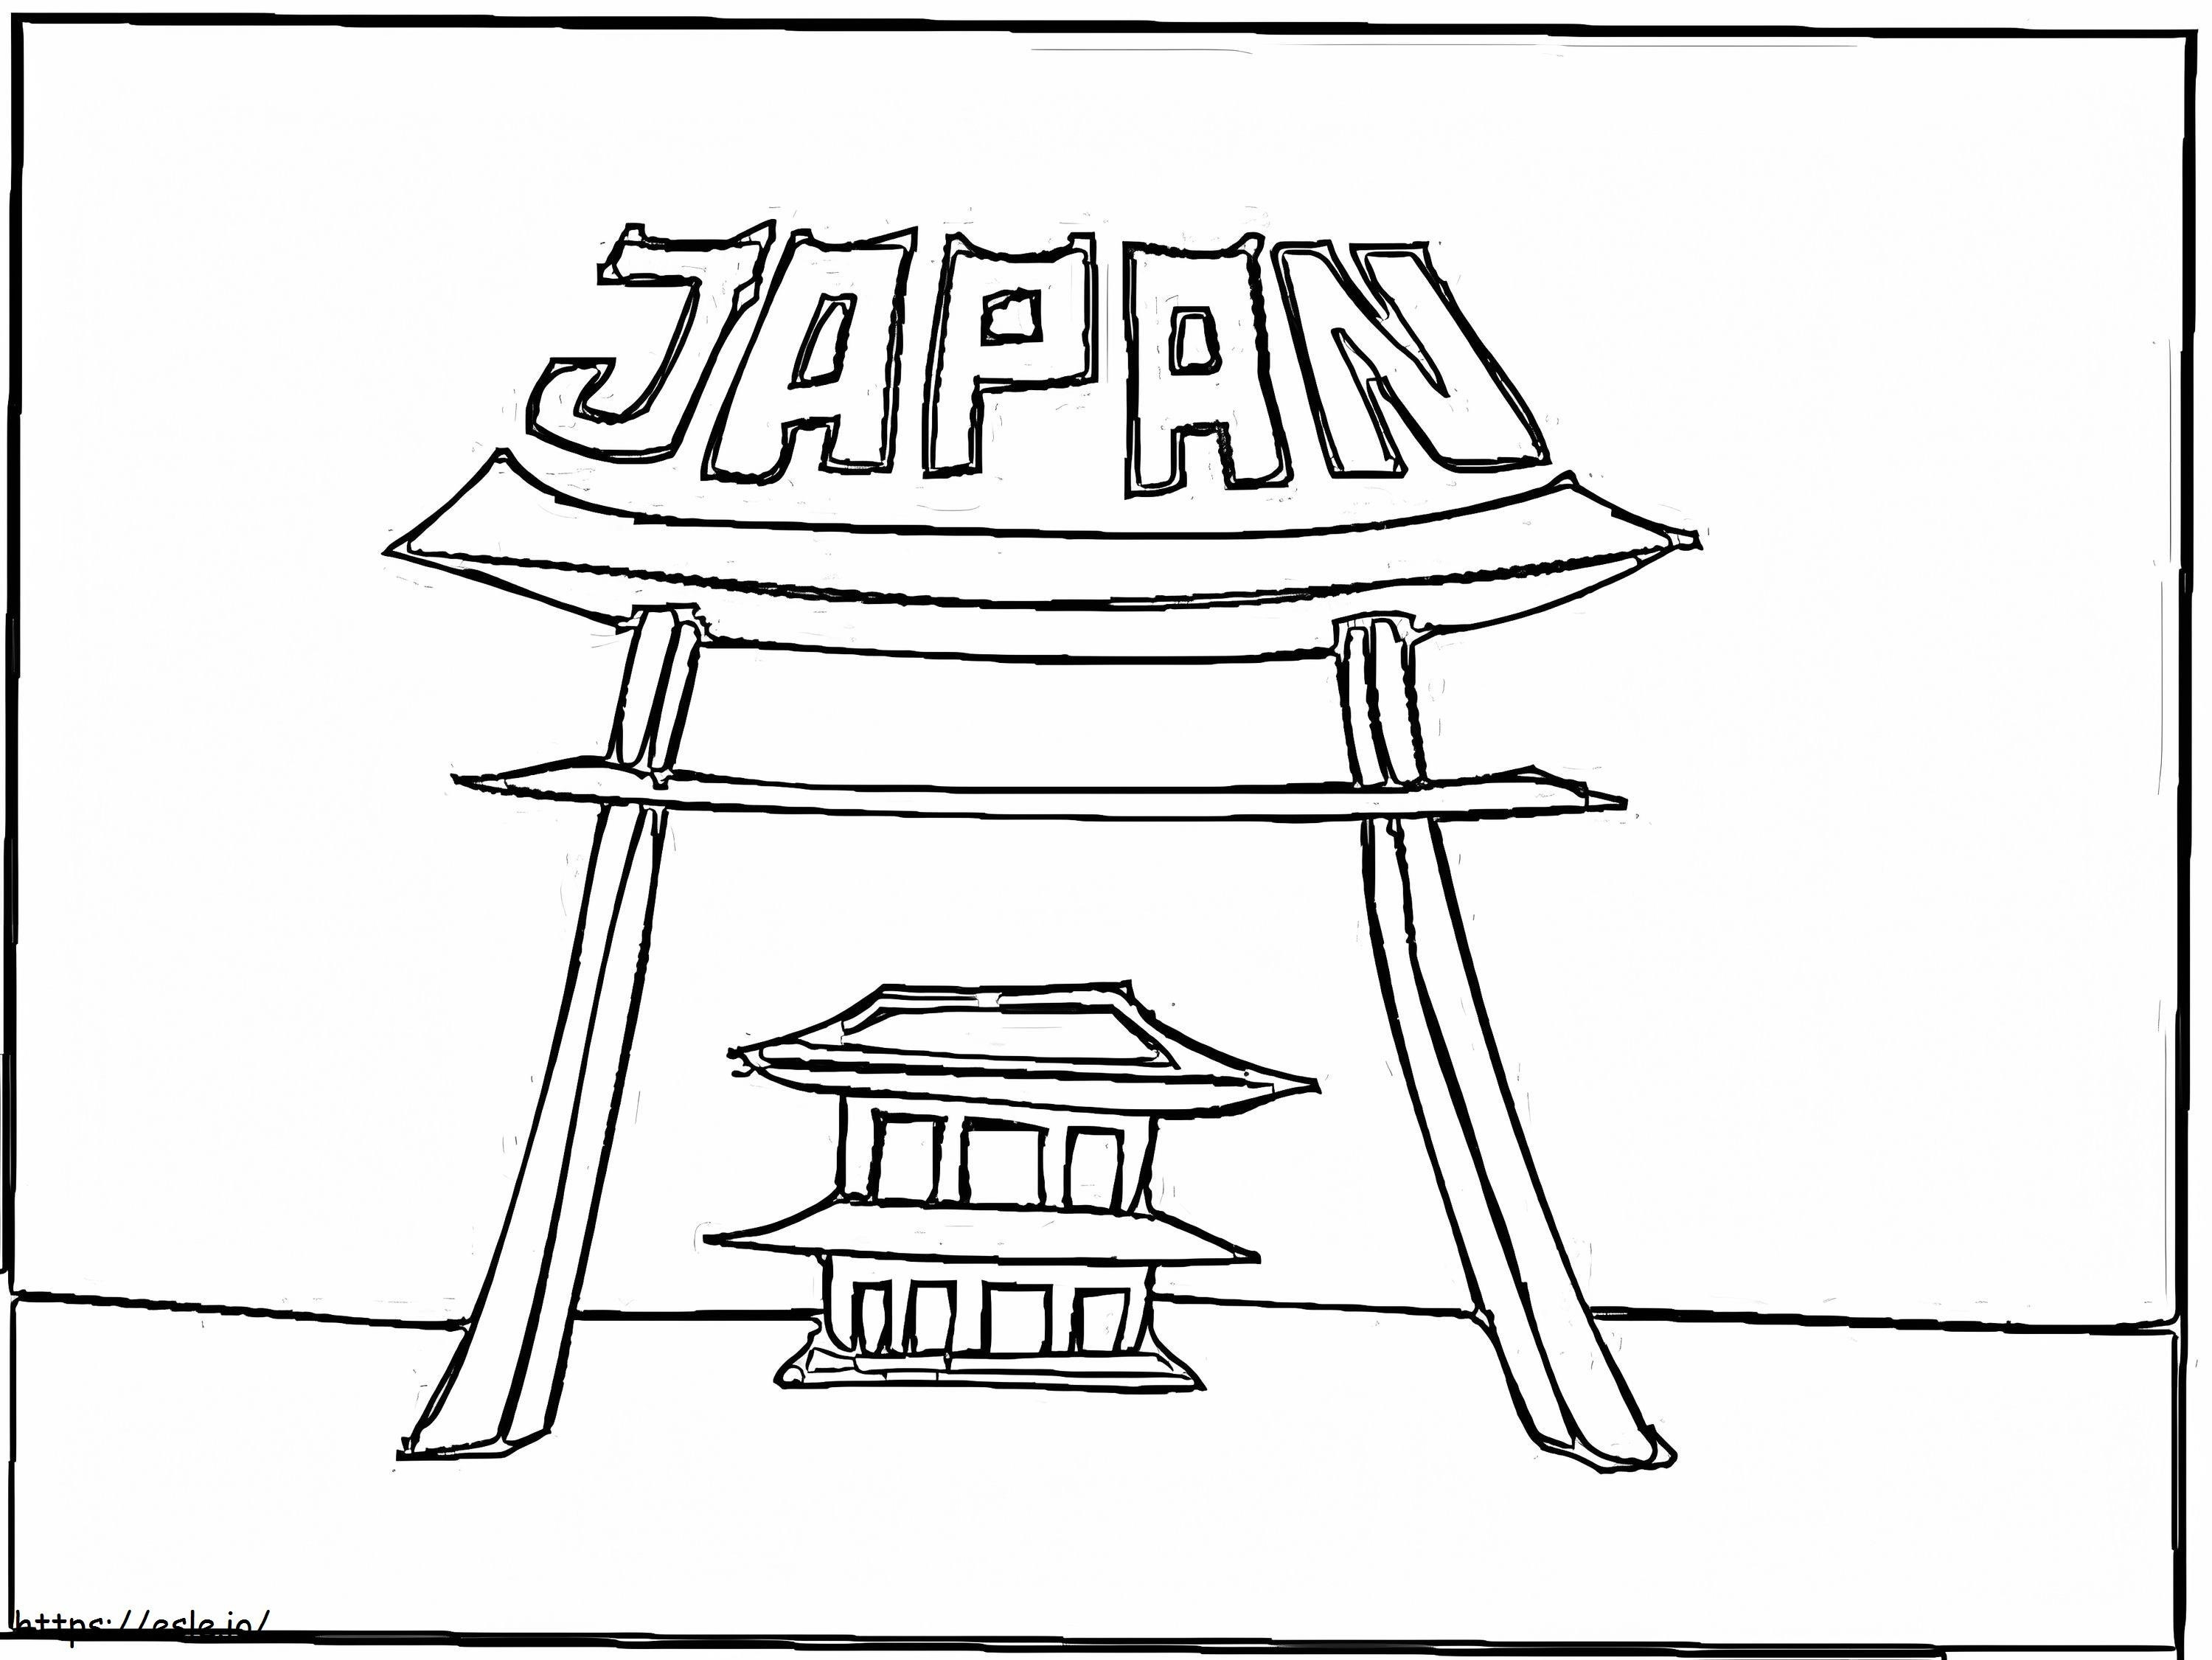 Japan Gate coloring page